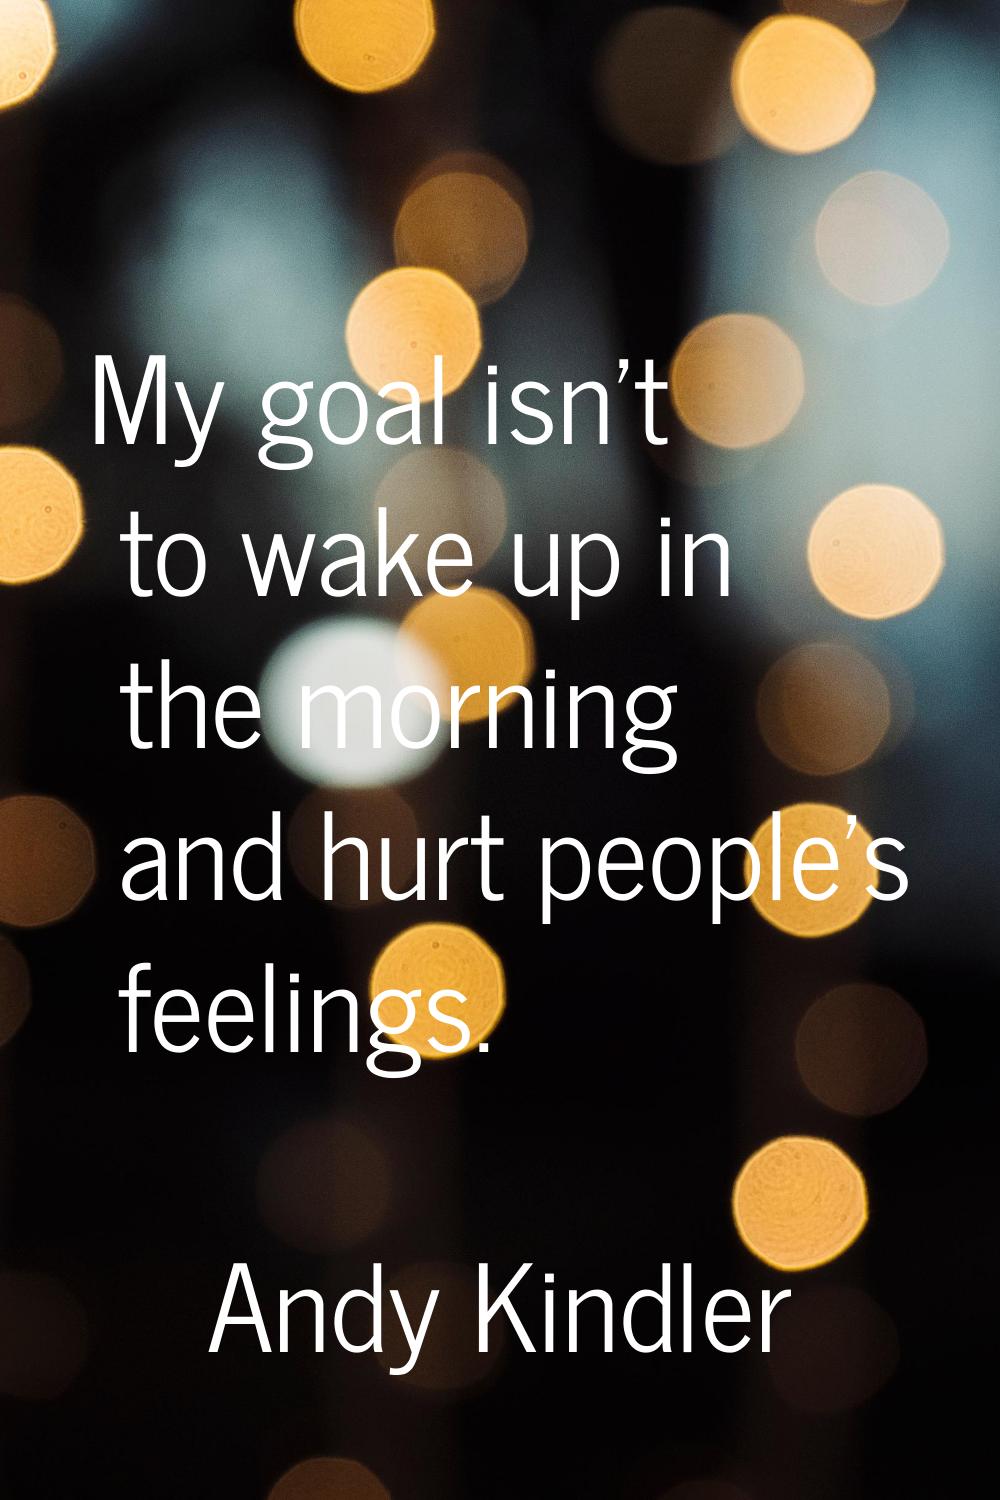 My goal isn't to wake up in the morning and hurt people's feelings.